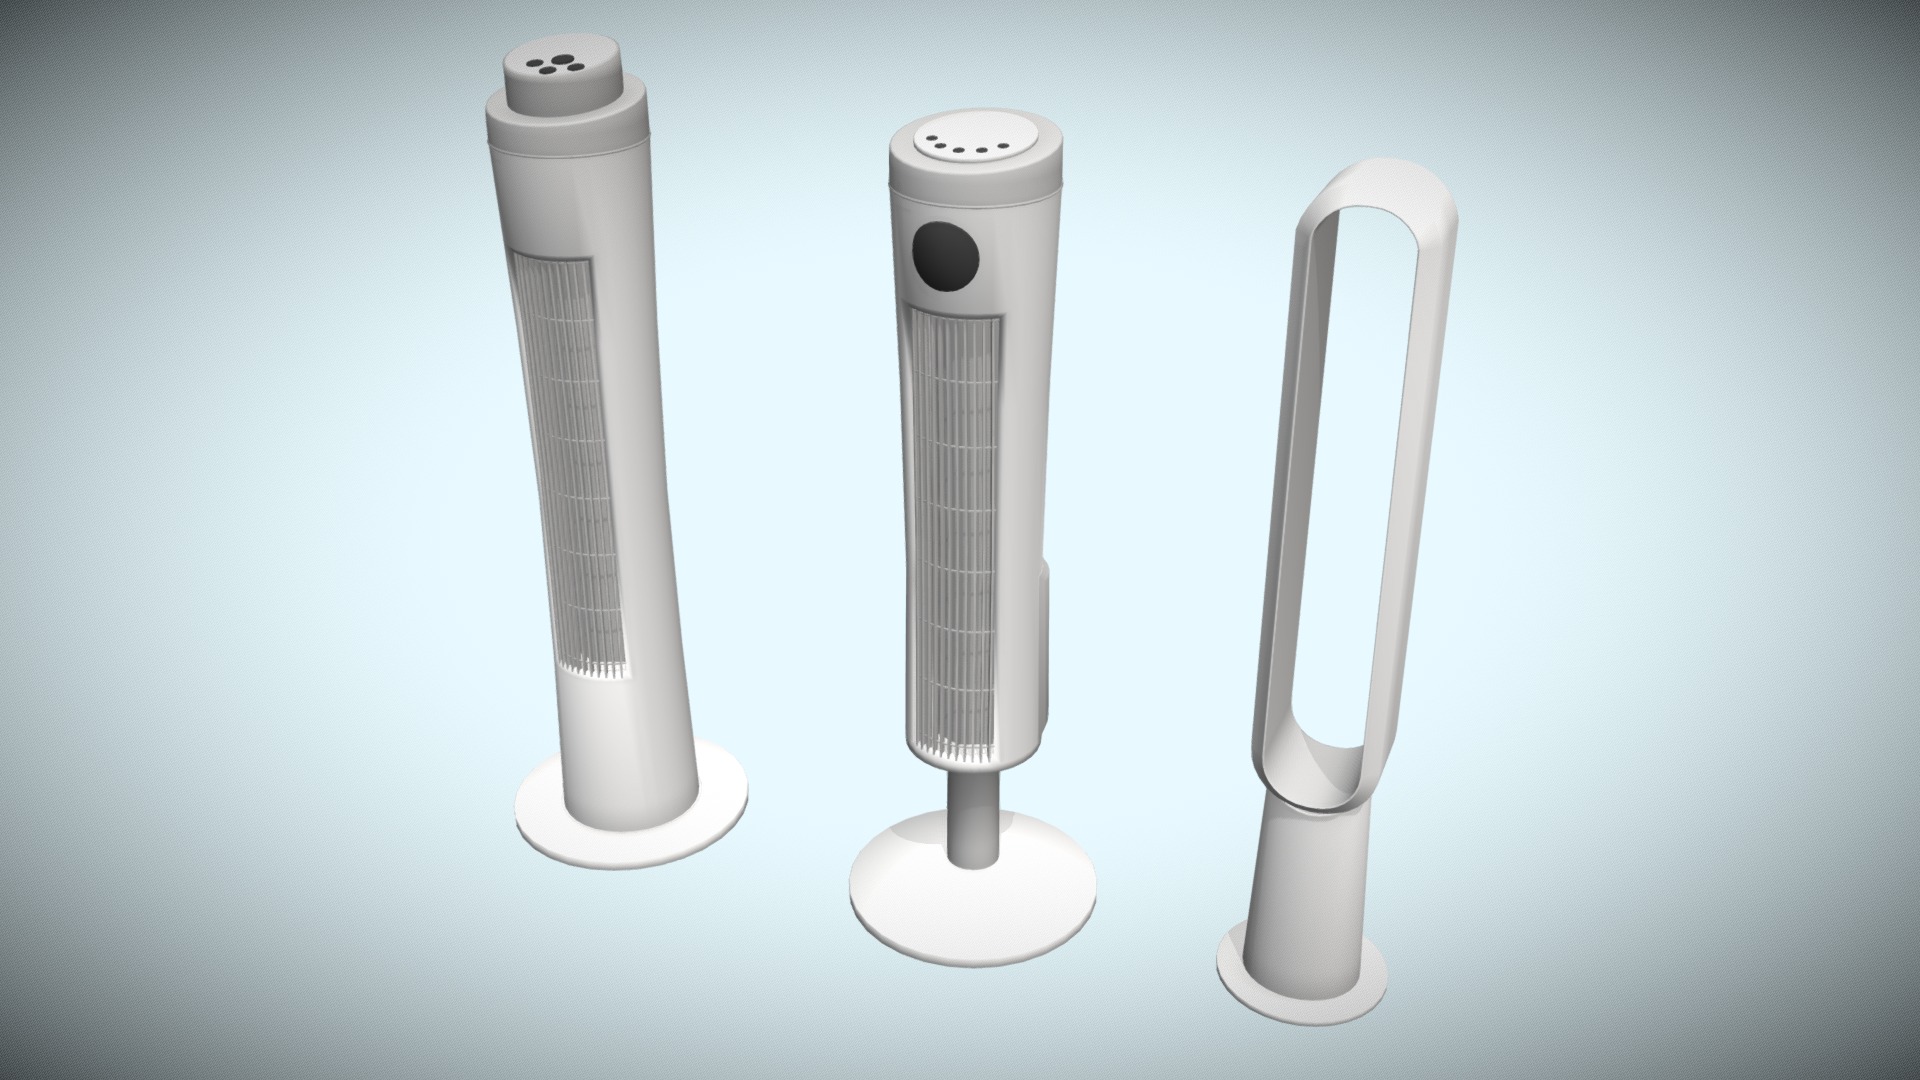 3D model Low Poly Modern Tower Fans - This is a 3D model of the Low Poly Modern Tower Fans. The 3D model is about a few white and black objects.